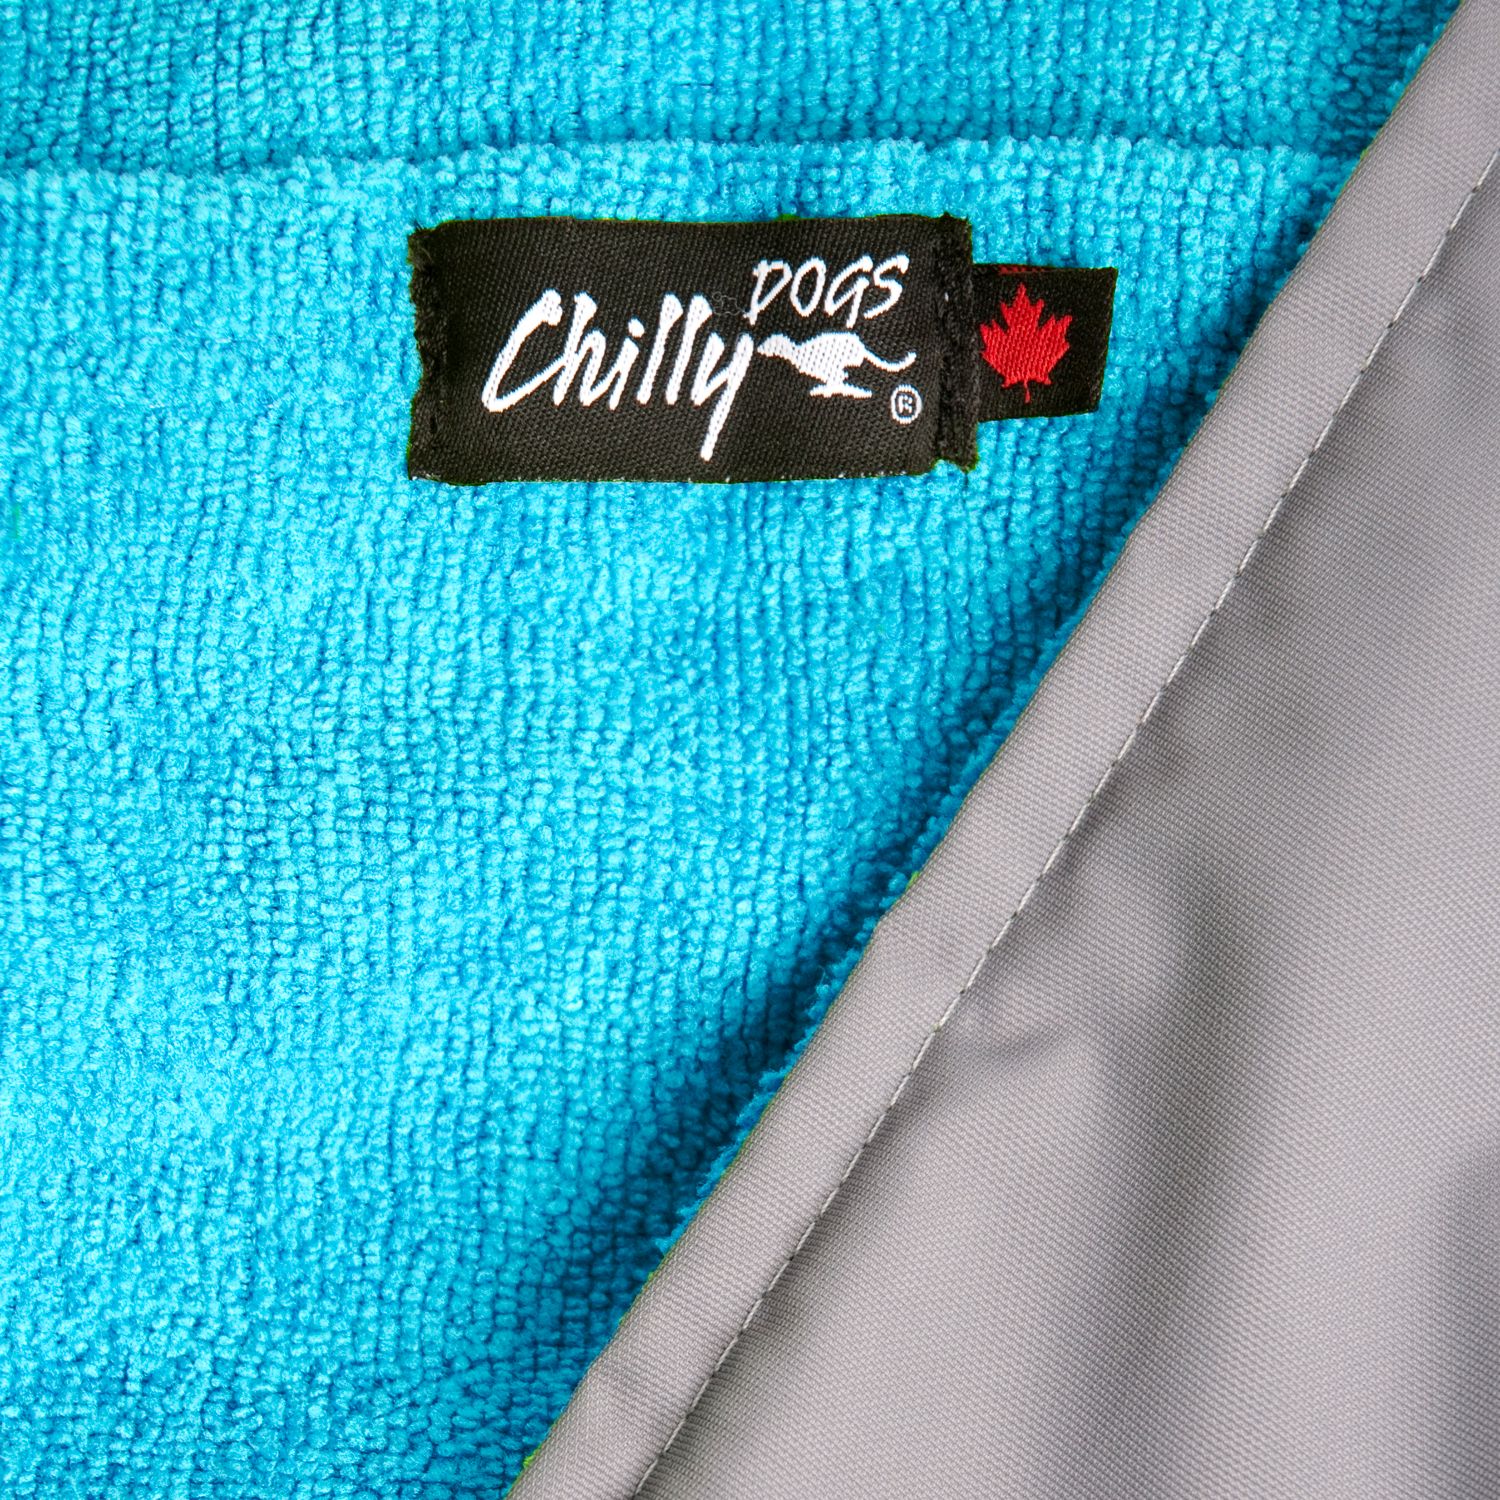 Chilly Dogs Reversible Soaker Mat